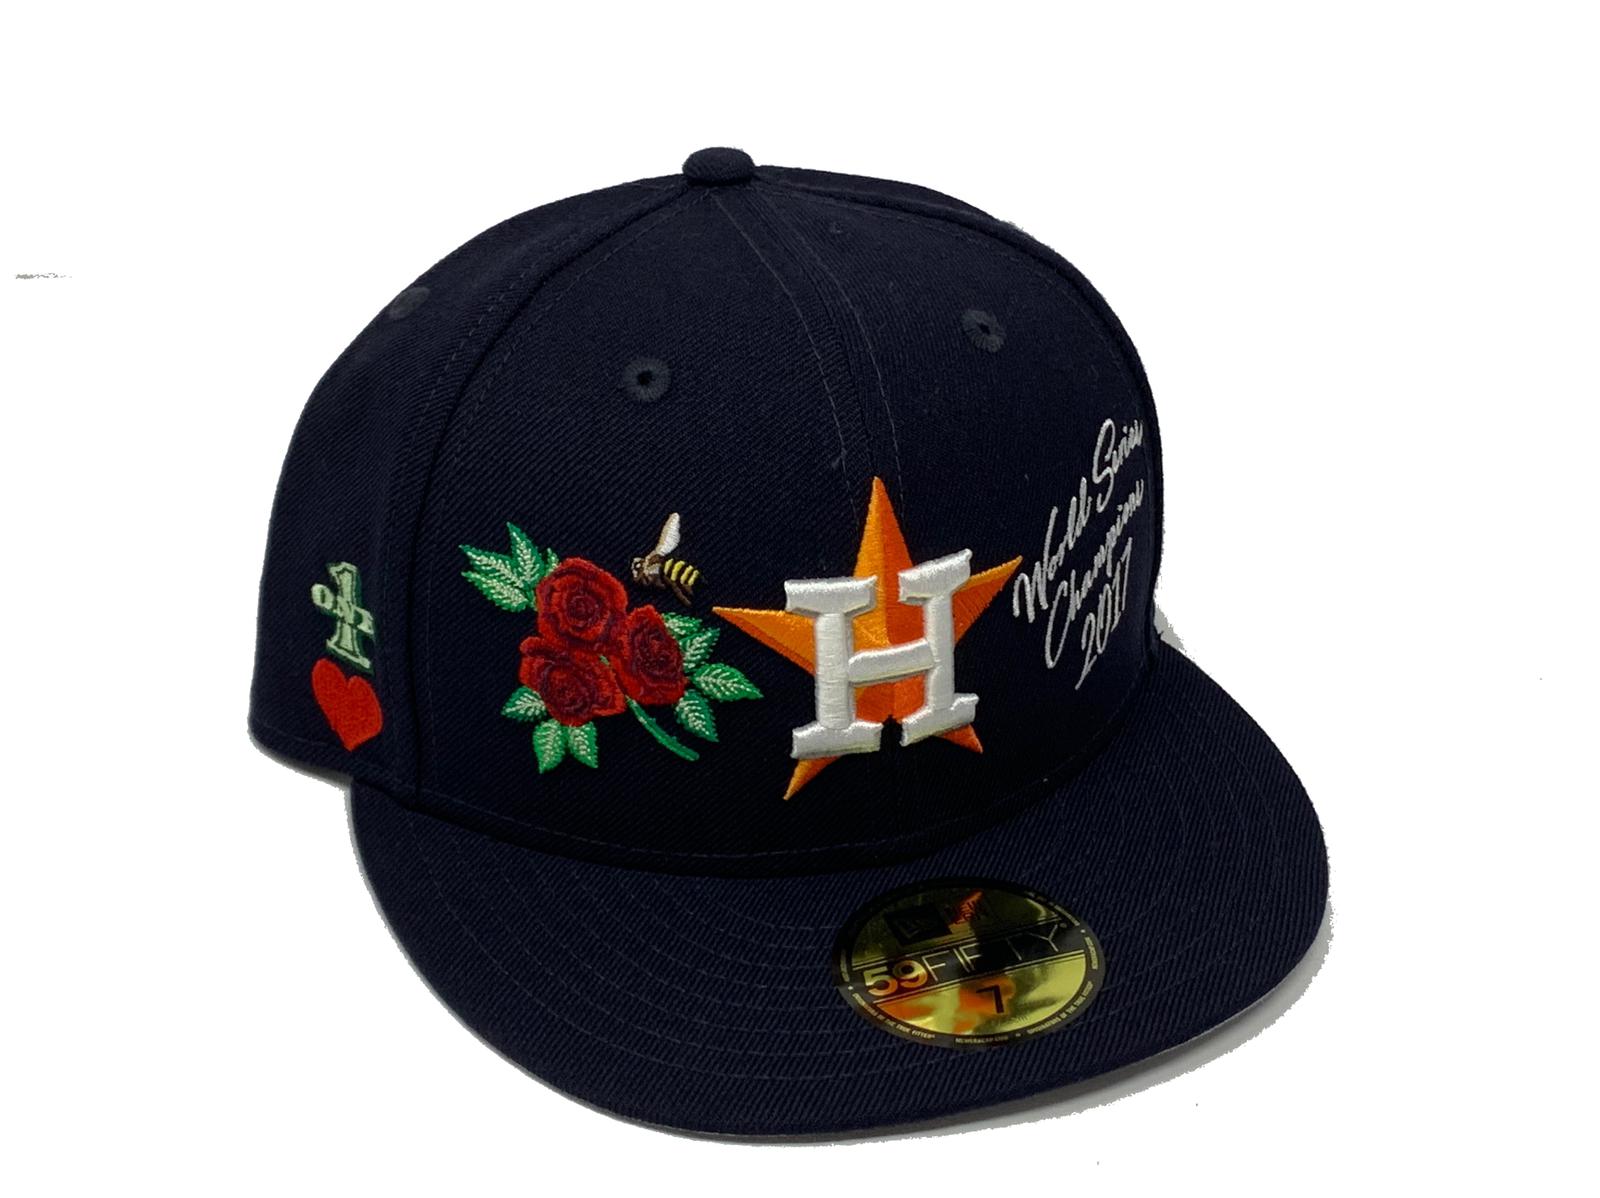 HOUSTON ASTRO ALL OVER PATCH GRAY BRIM NEW ERA FITTED HAT – Sports